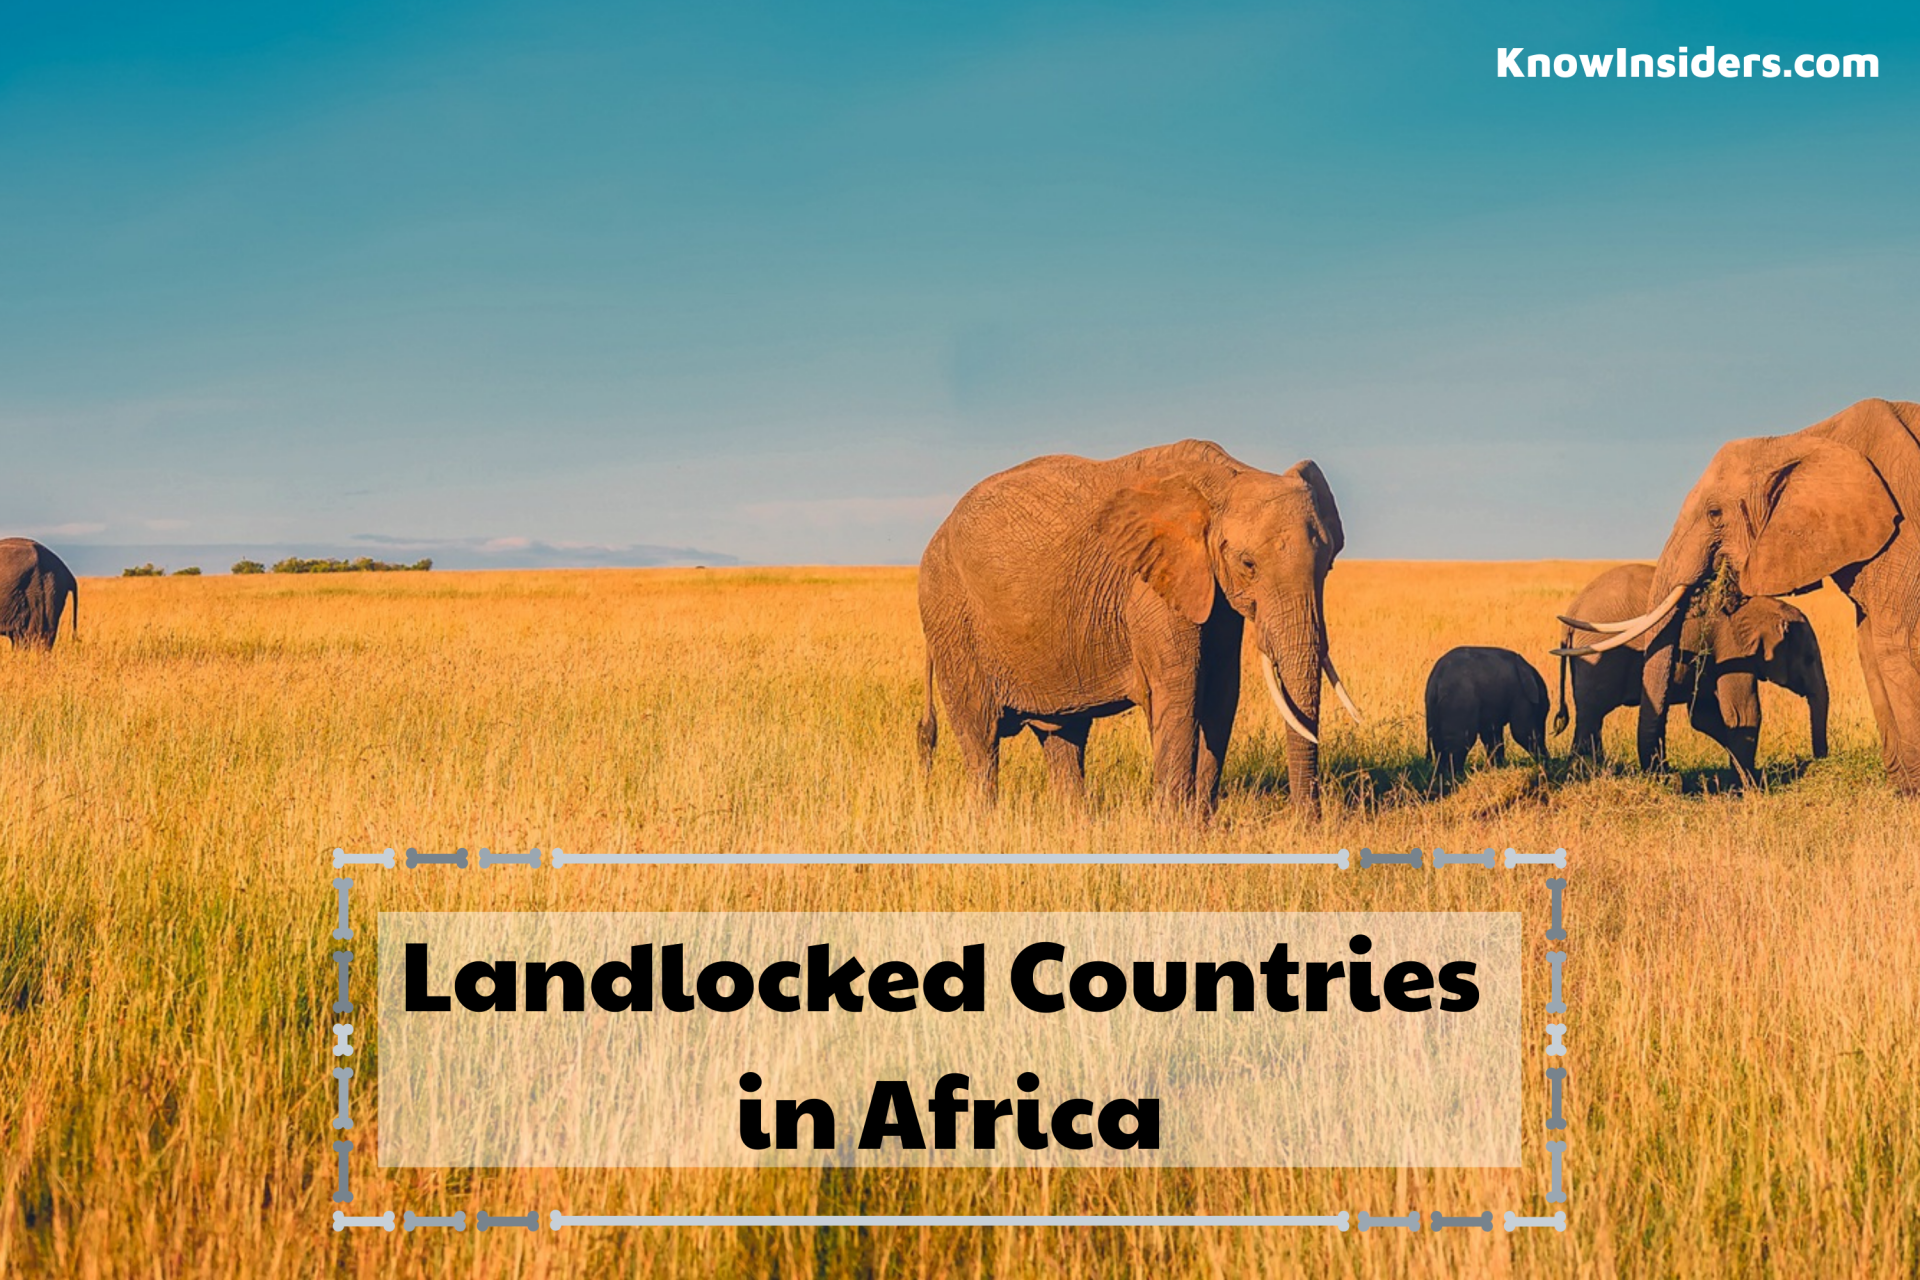 What Are the Landlocked Countries In Africa